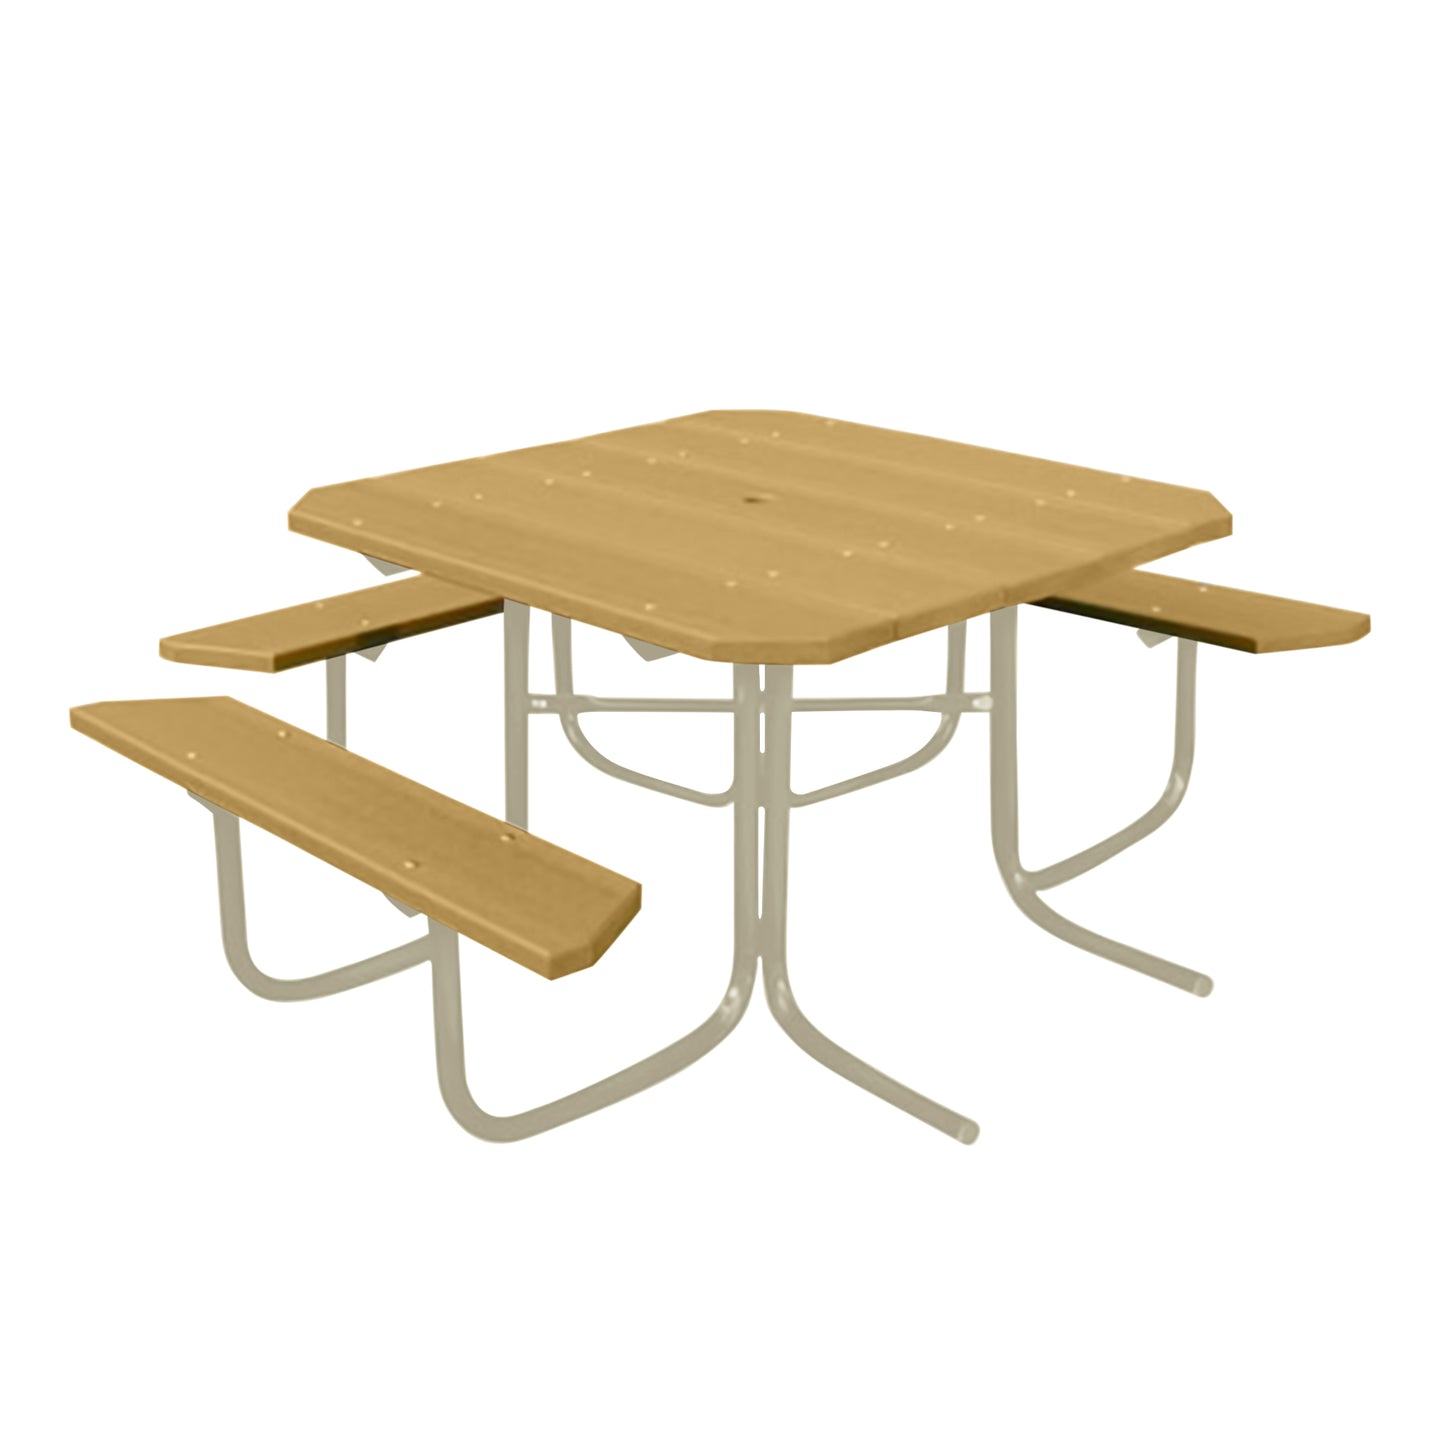 UltraPlay 48" Wood Finish ADA Square Table with 3-seat